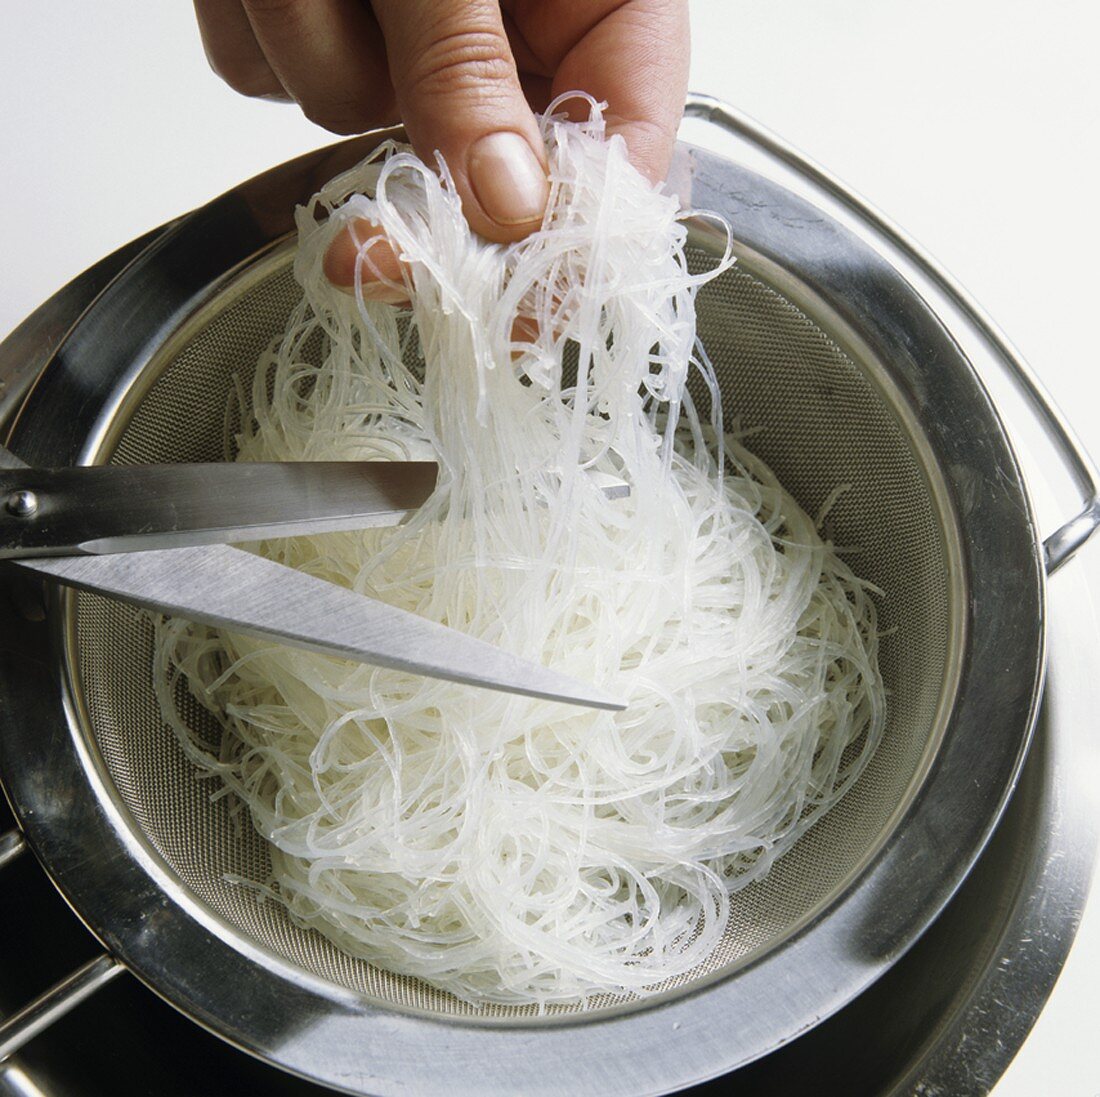 Cutting glass noodles with scissors